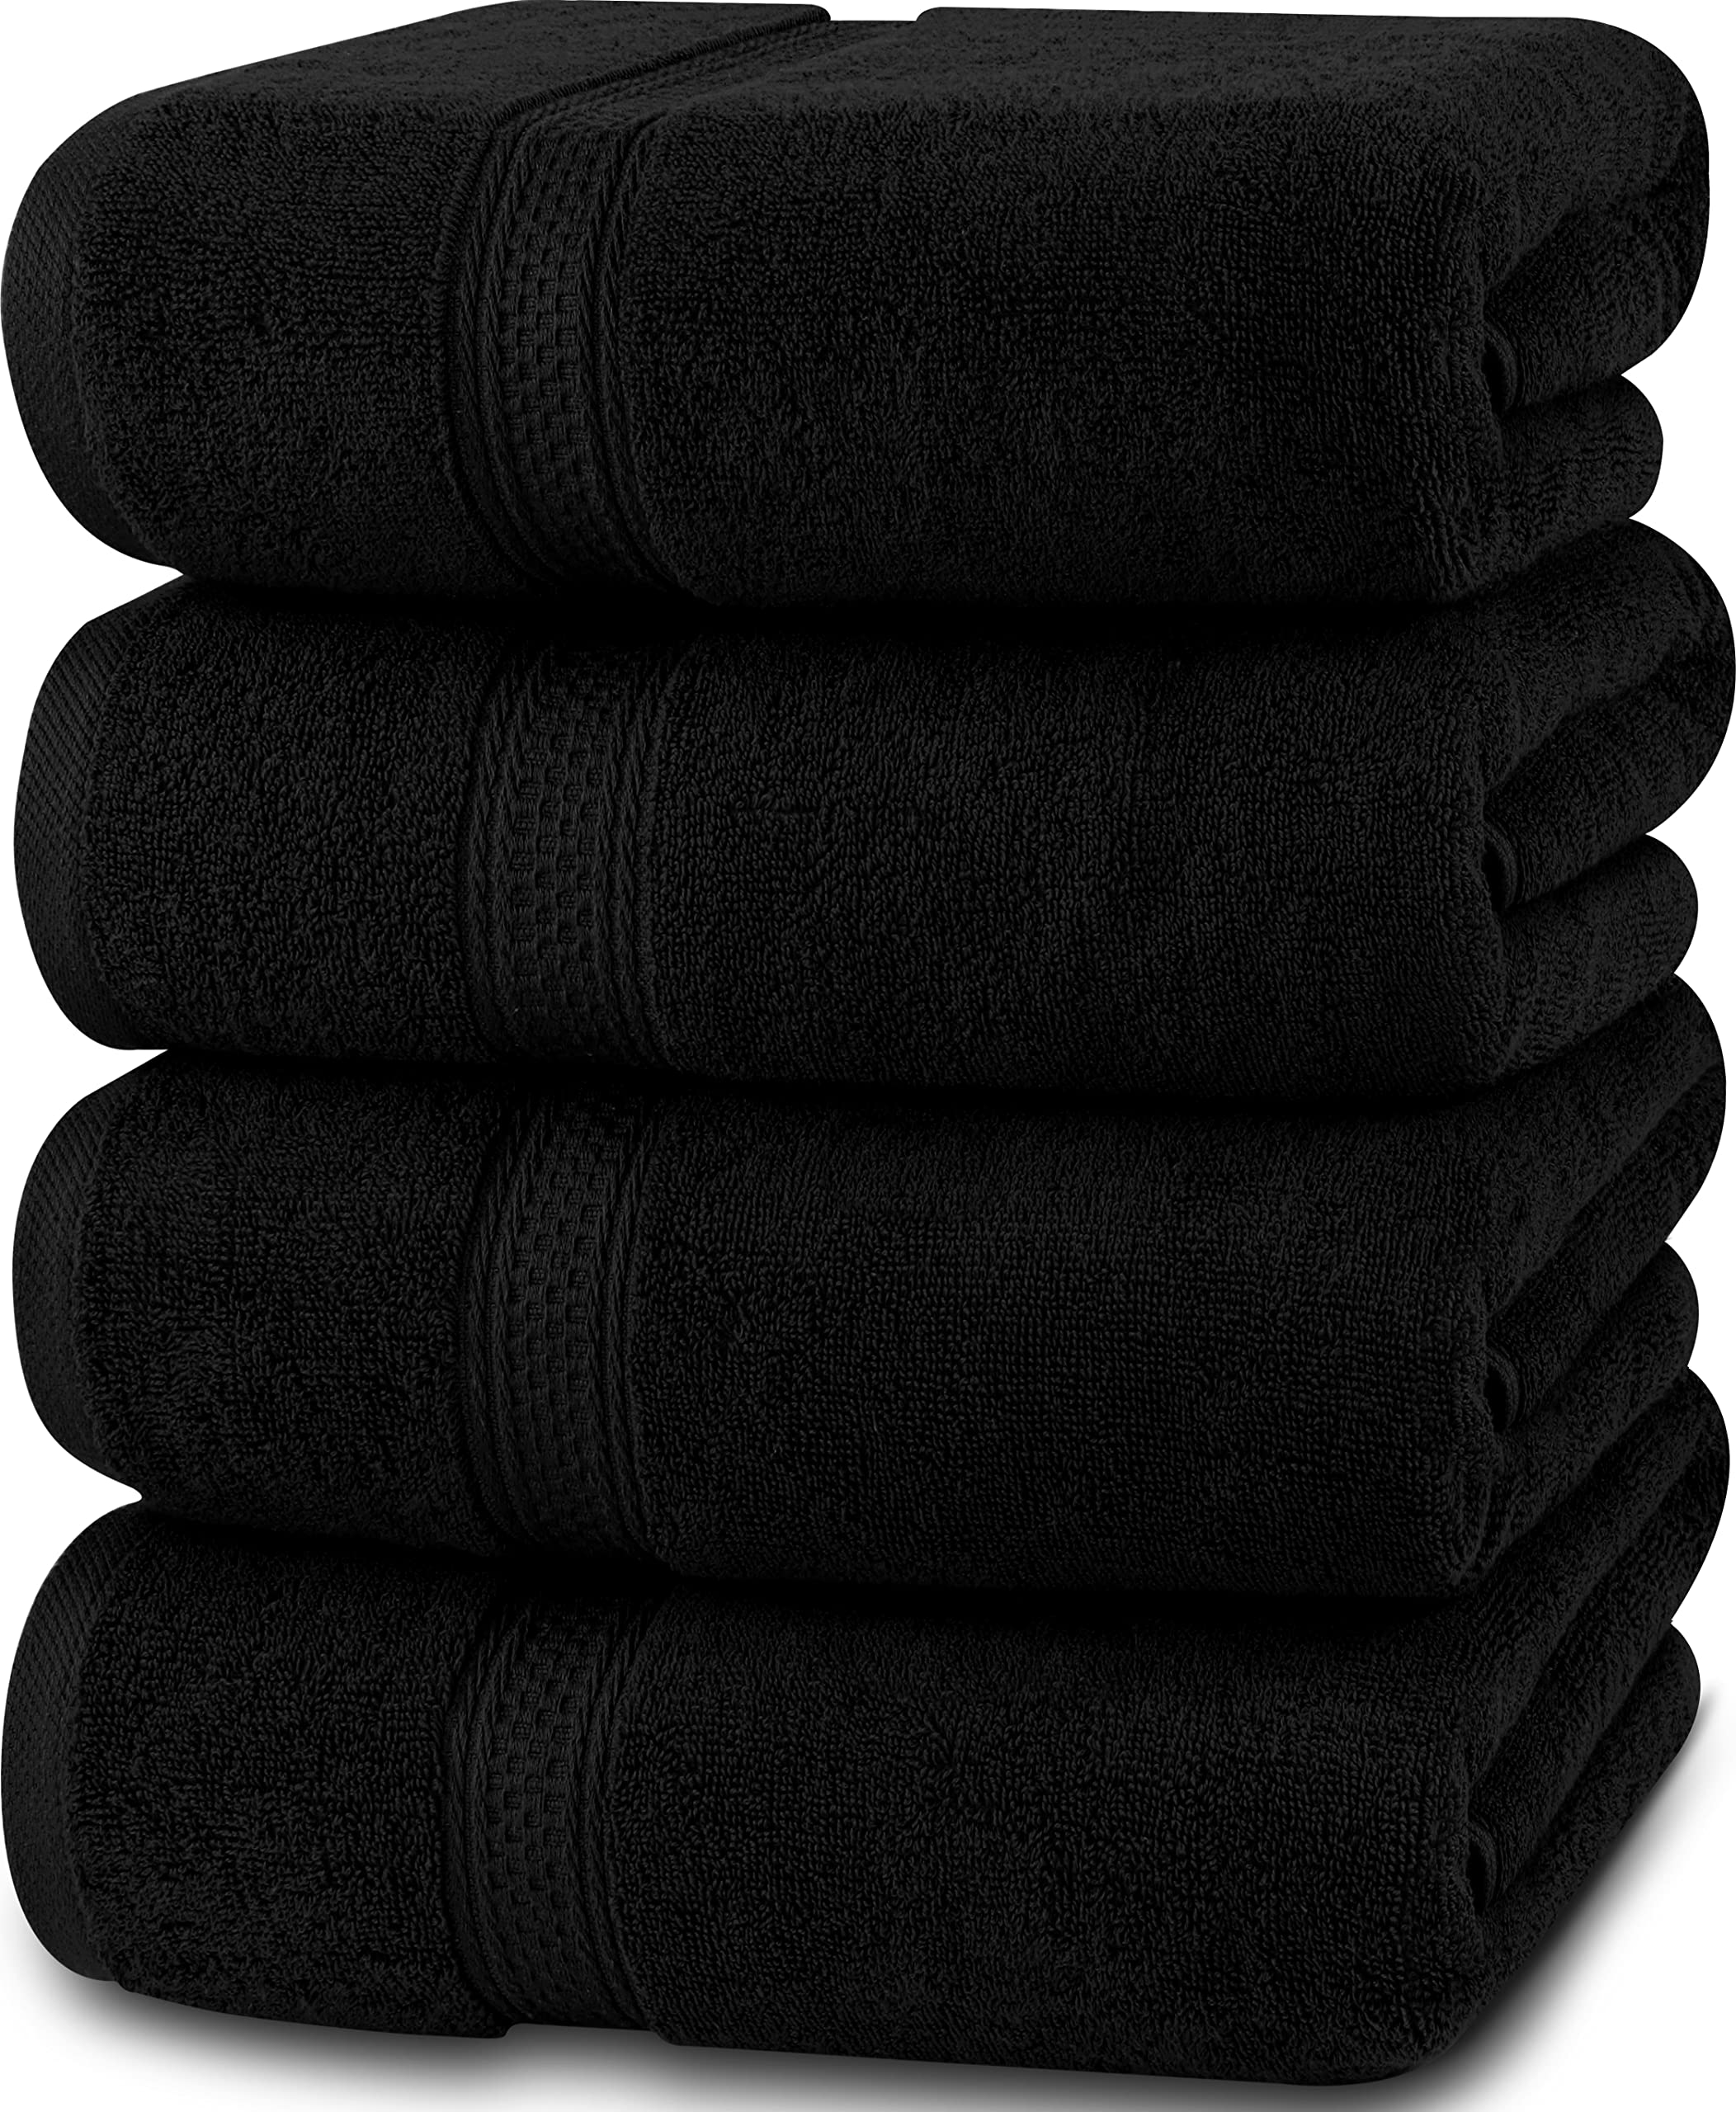 Utopia Towels - Bath Towels Set - Premium 100% Ring Spun Cotton - Quick  Dry, Highly Absorbent, Soft